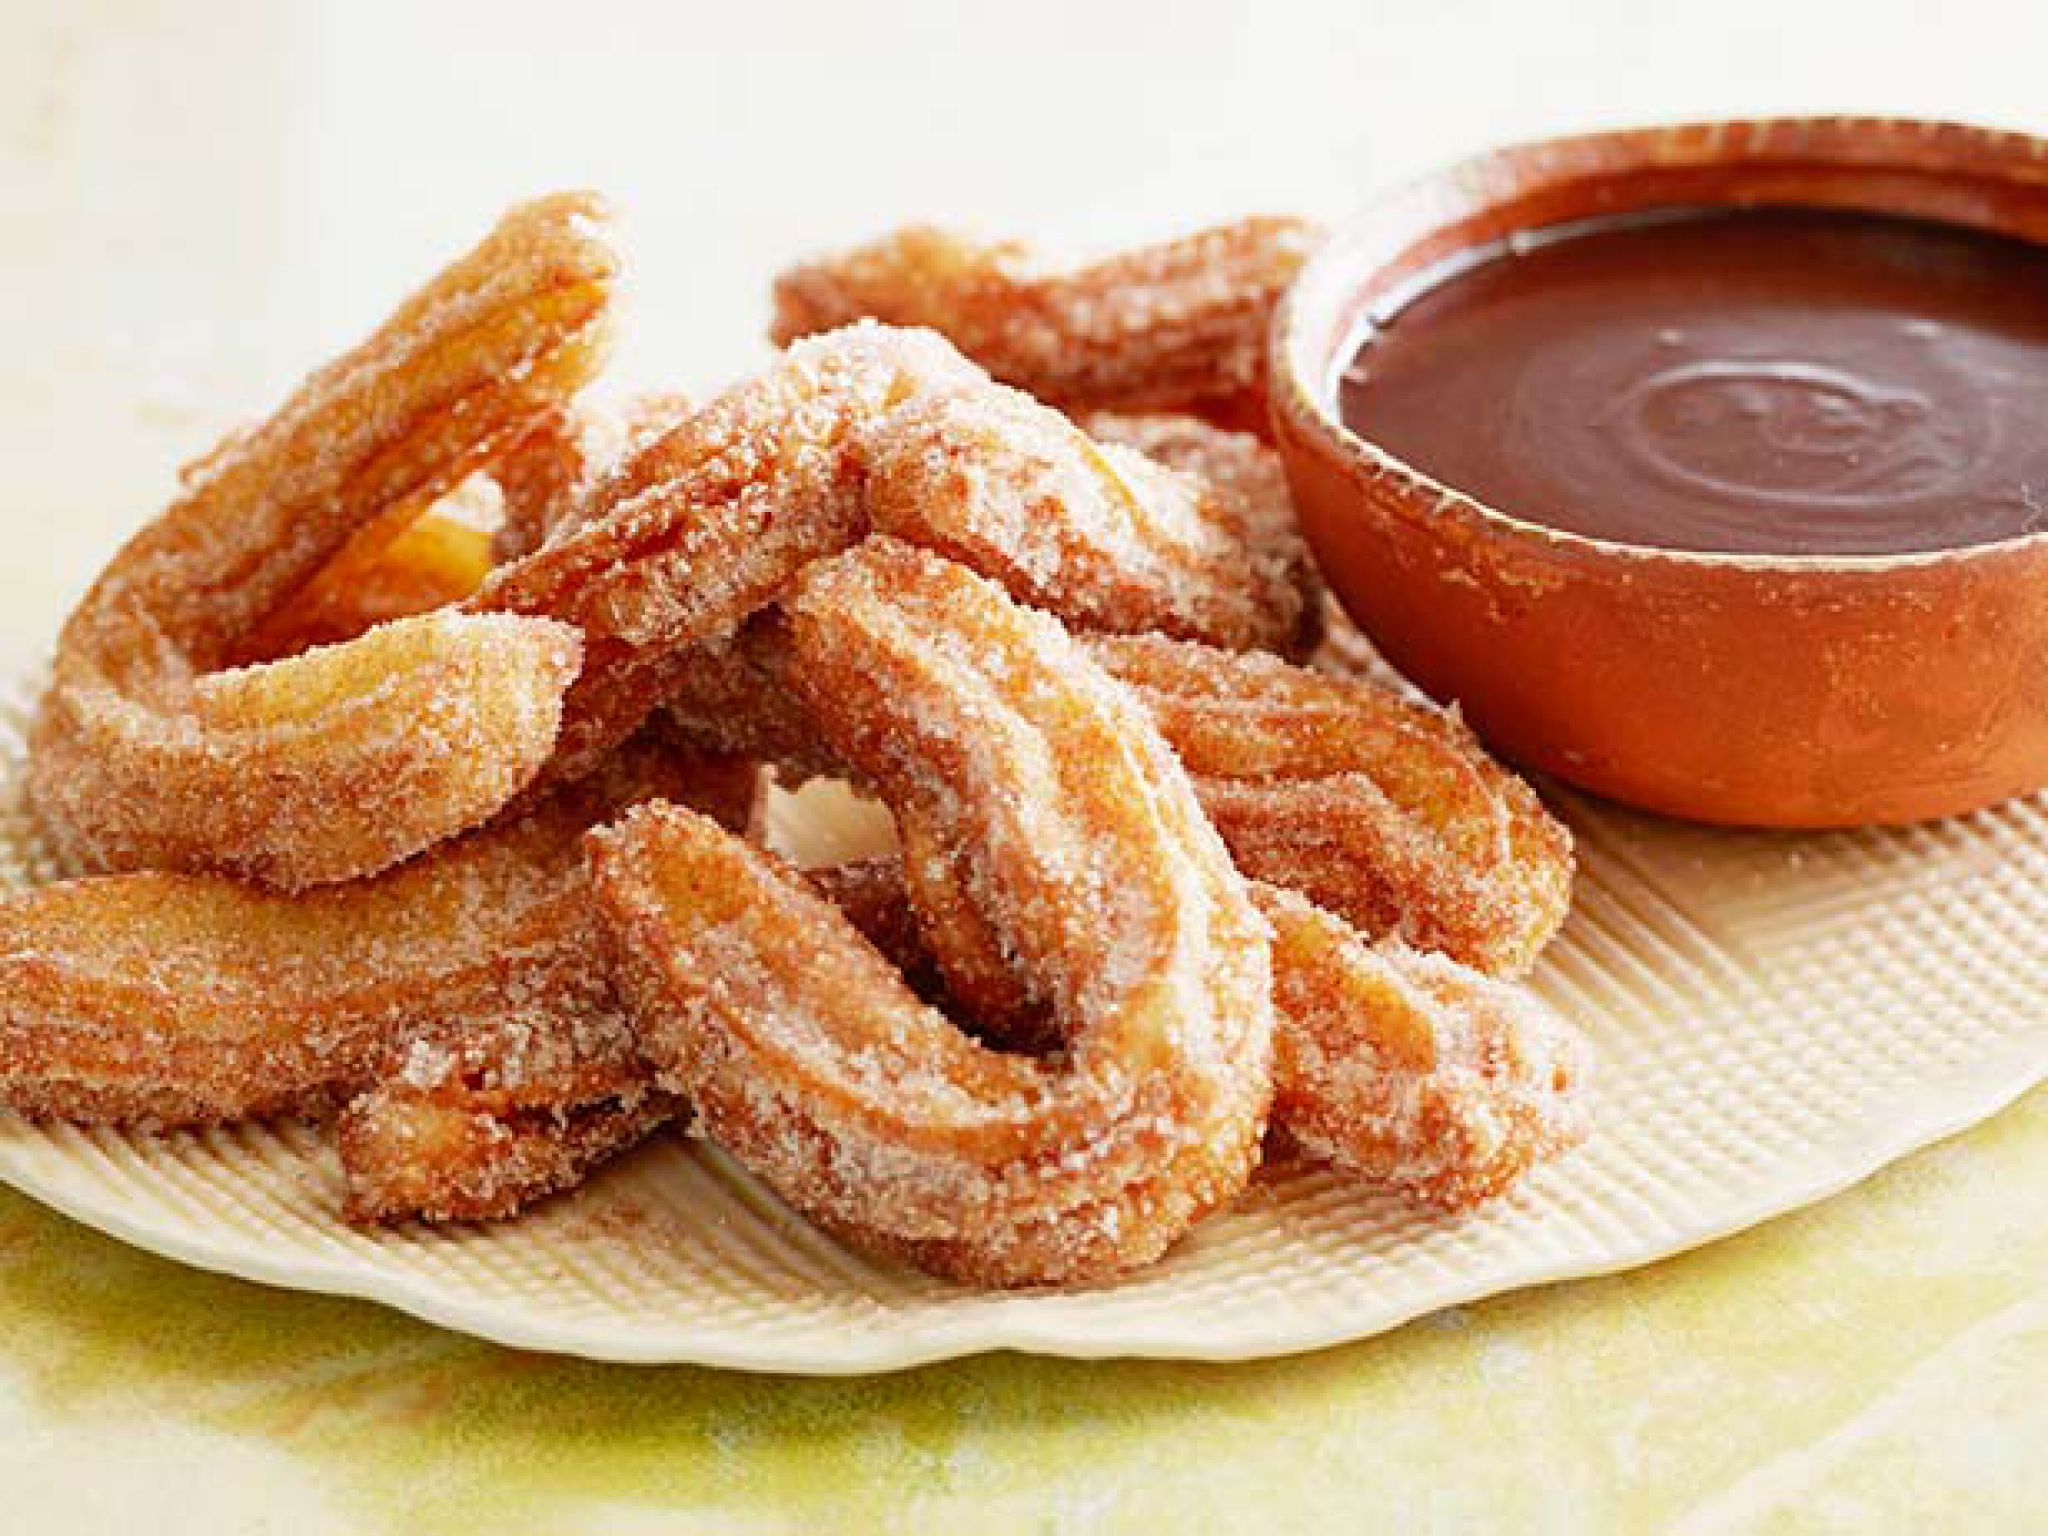 Tasty Mexican Churros recipe - Food you should try